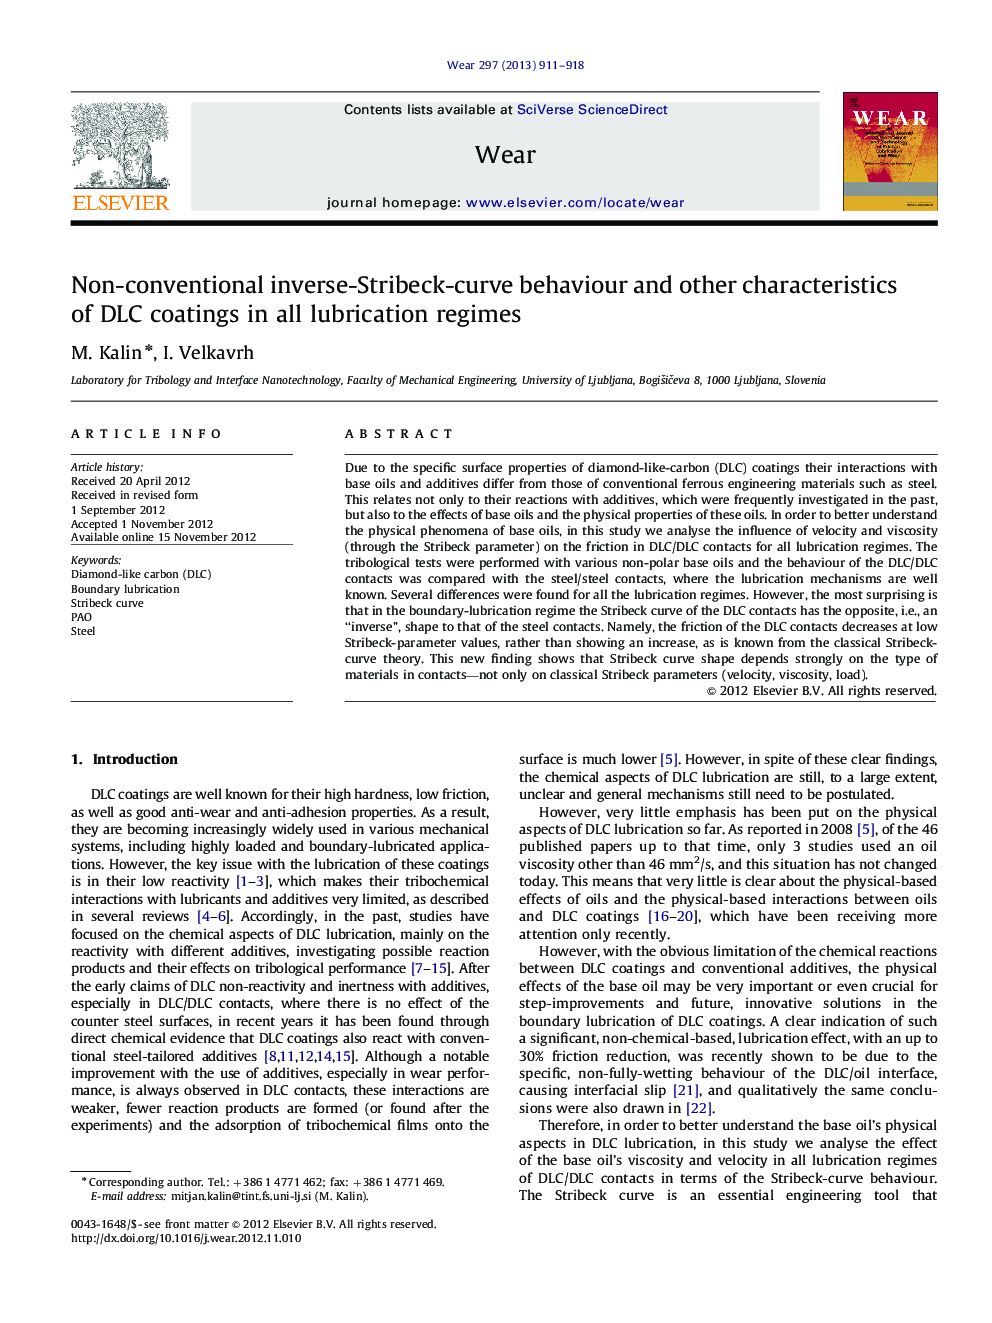 Non-conventional inverse-Stribeck-curve behaviour and other characteristics of DLC coatings in all lubrication regimes